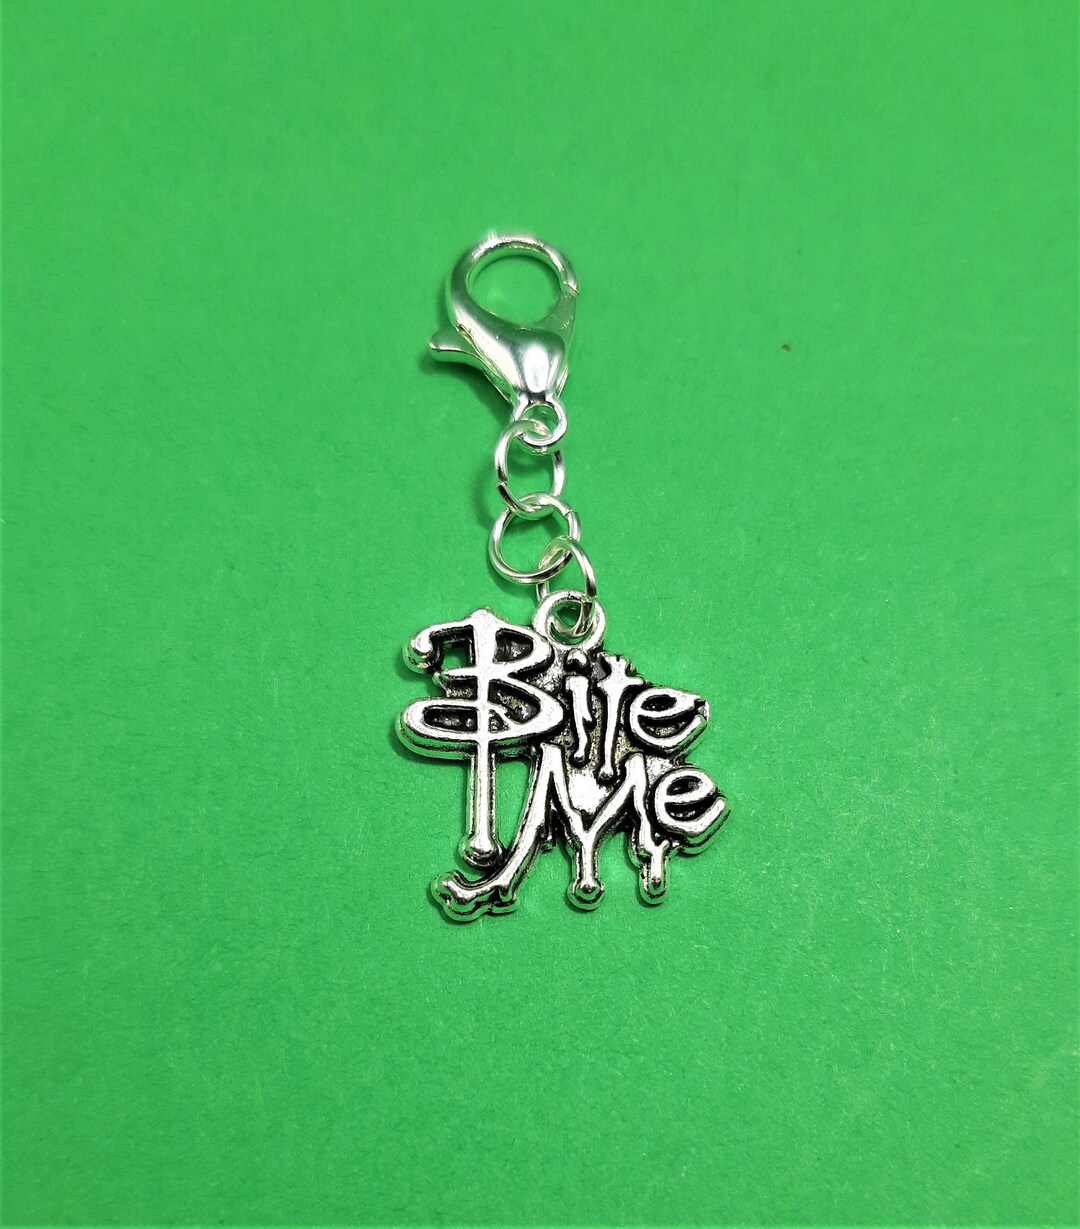 Silver Bite Me Badge Reel Charm Accessory Zipper Pull Cell Phone